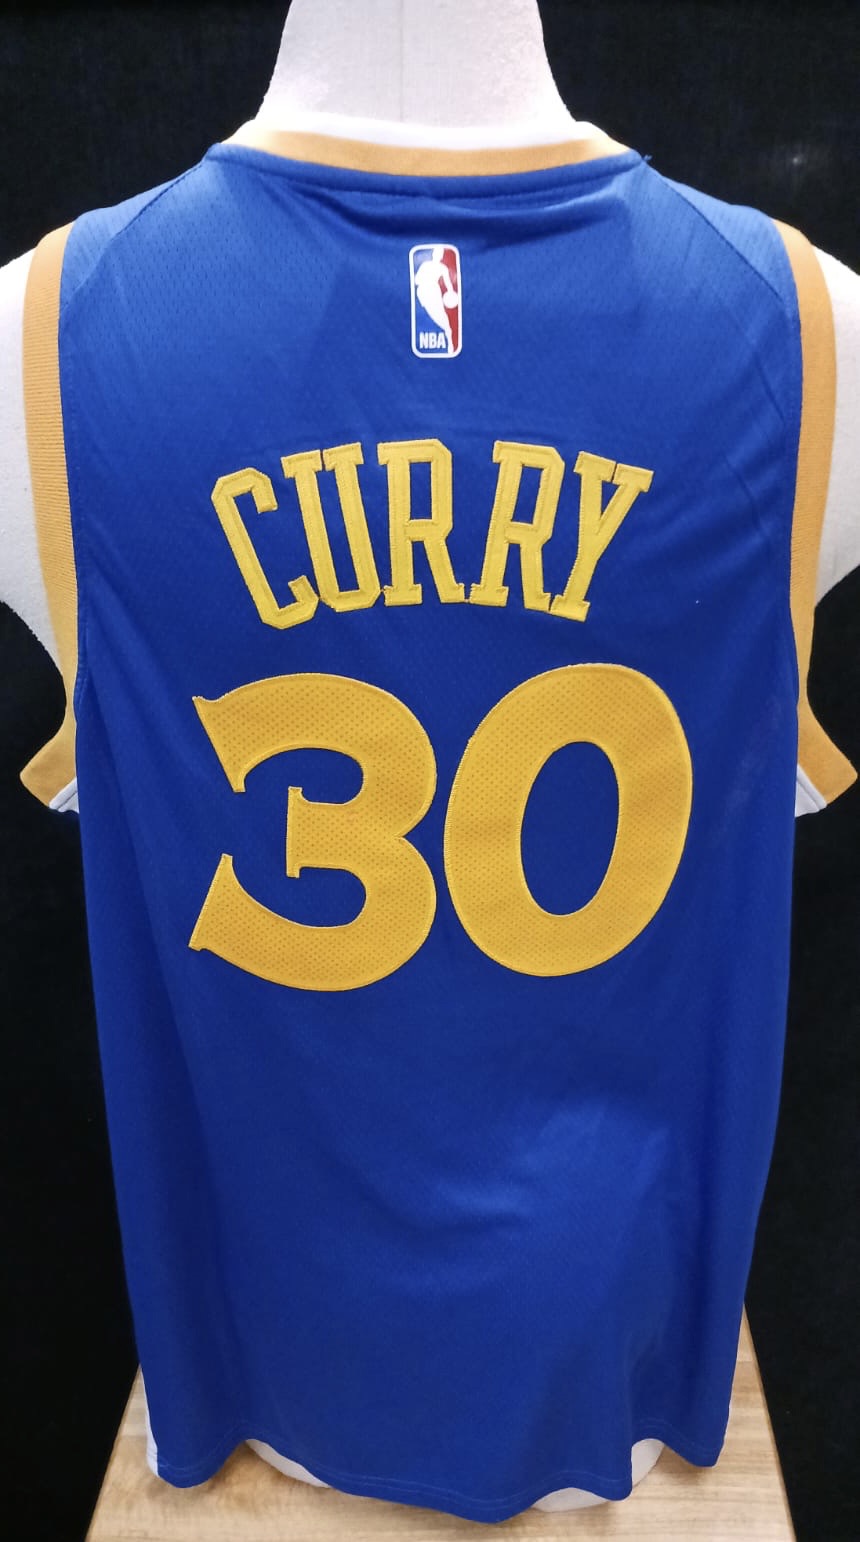 steph curry jersey nike